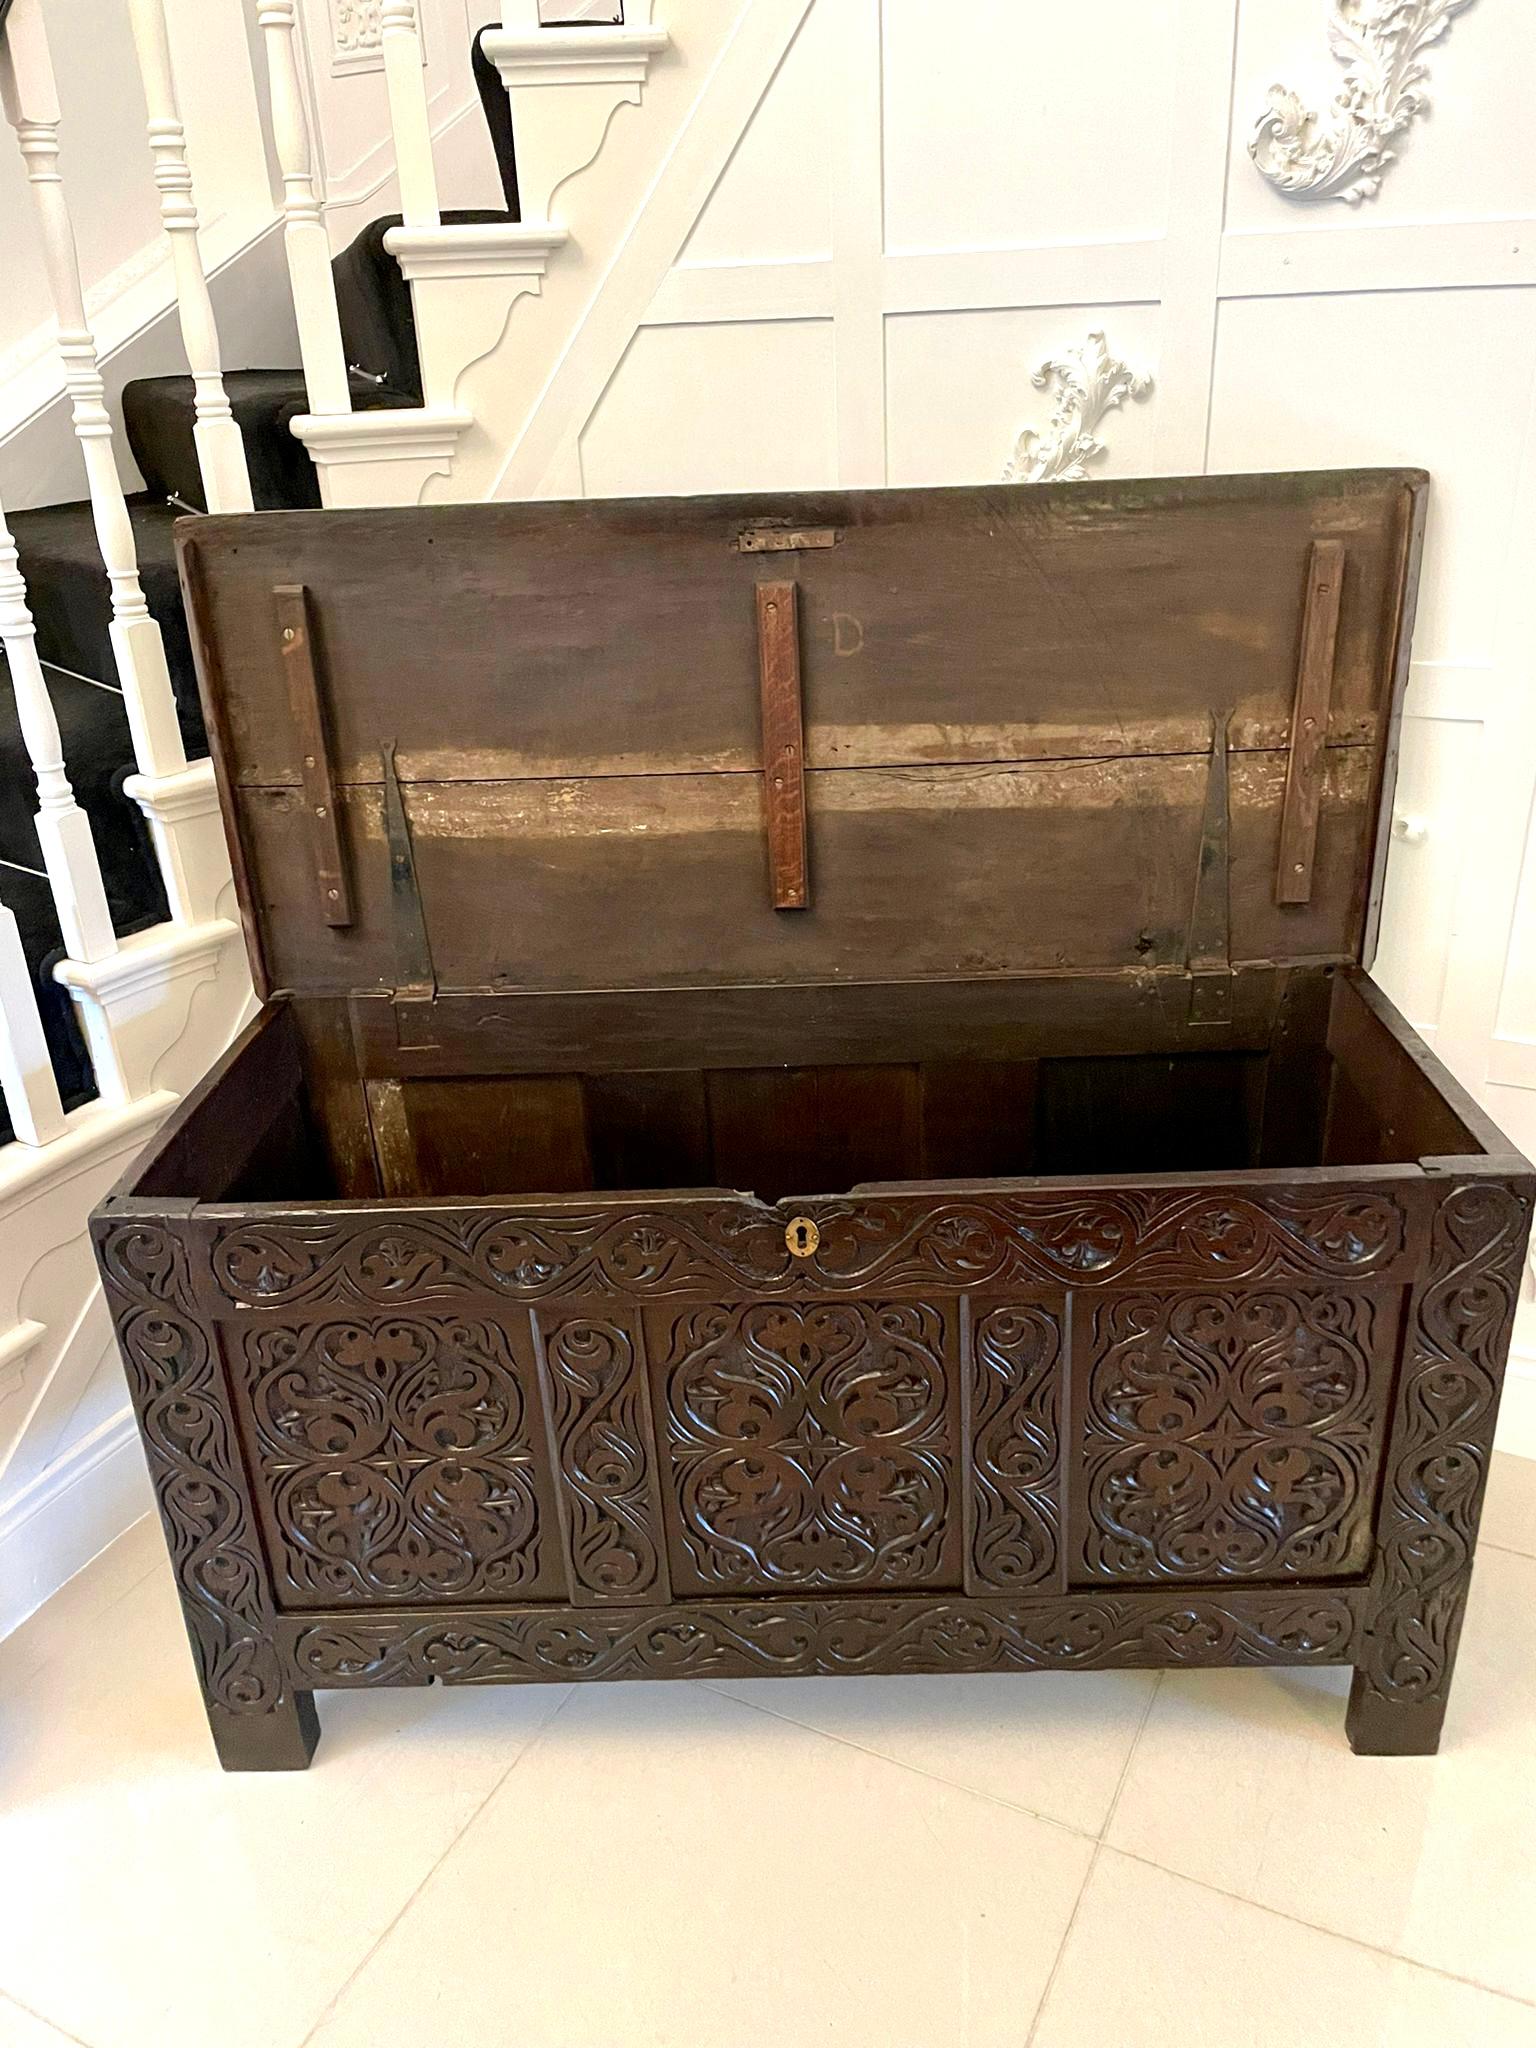 Antique early 18th century carved oak coffer/chest having finely carved detail to the panels and frieze, panelled sides, standing on stile feet. 

A fantastic example in original condition and boasting a wonderful age related